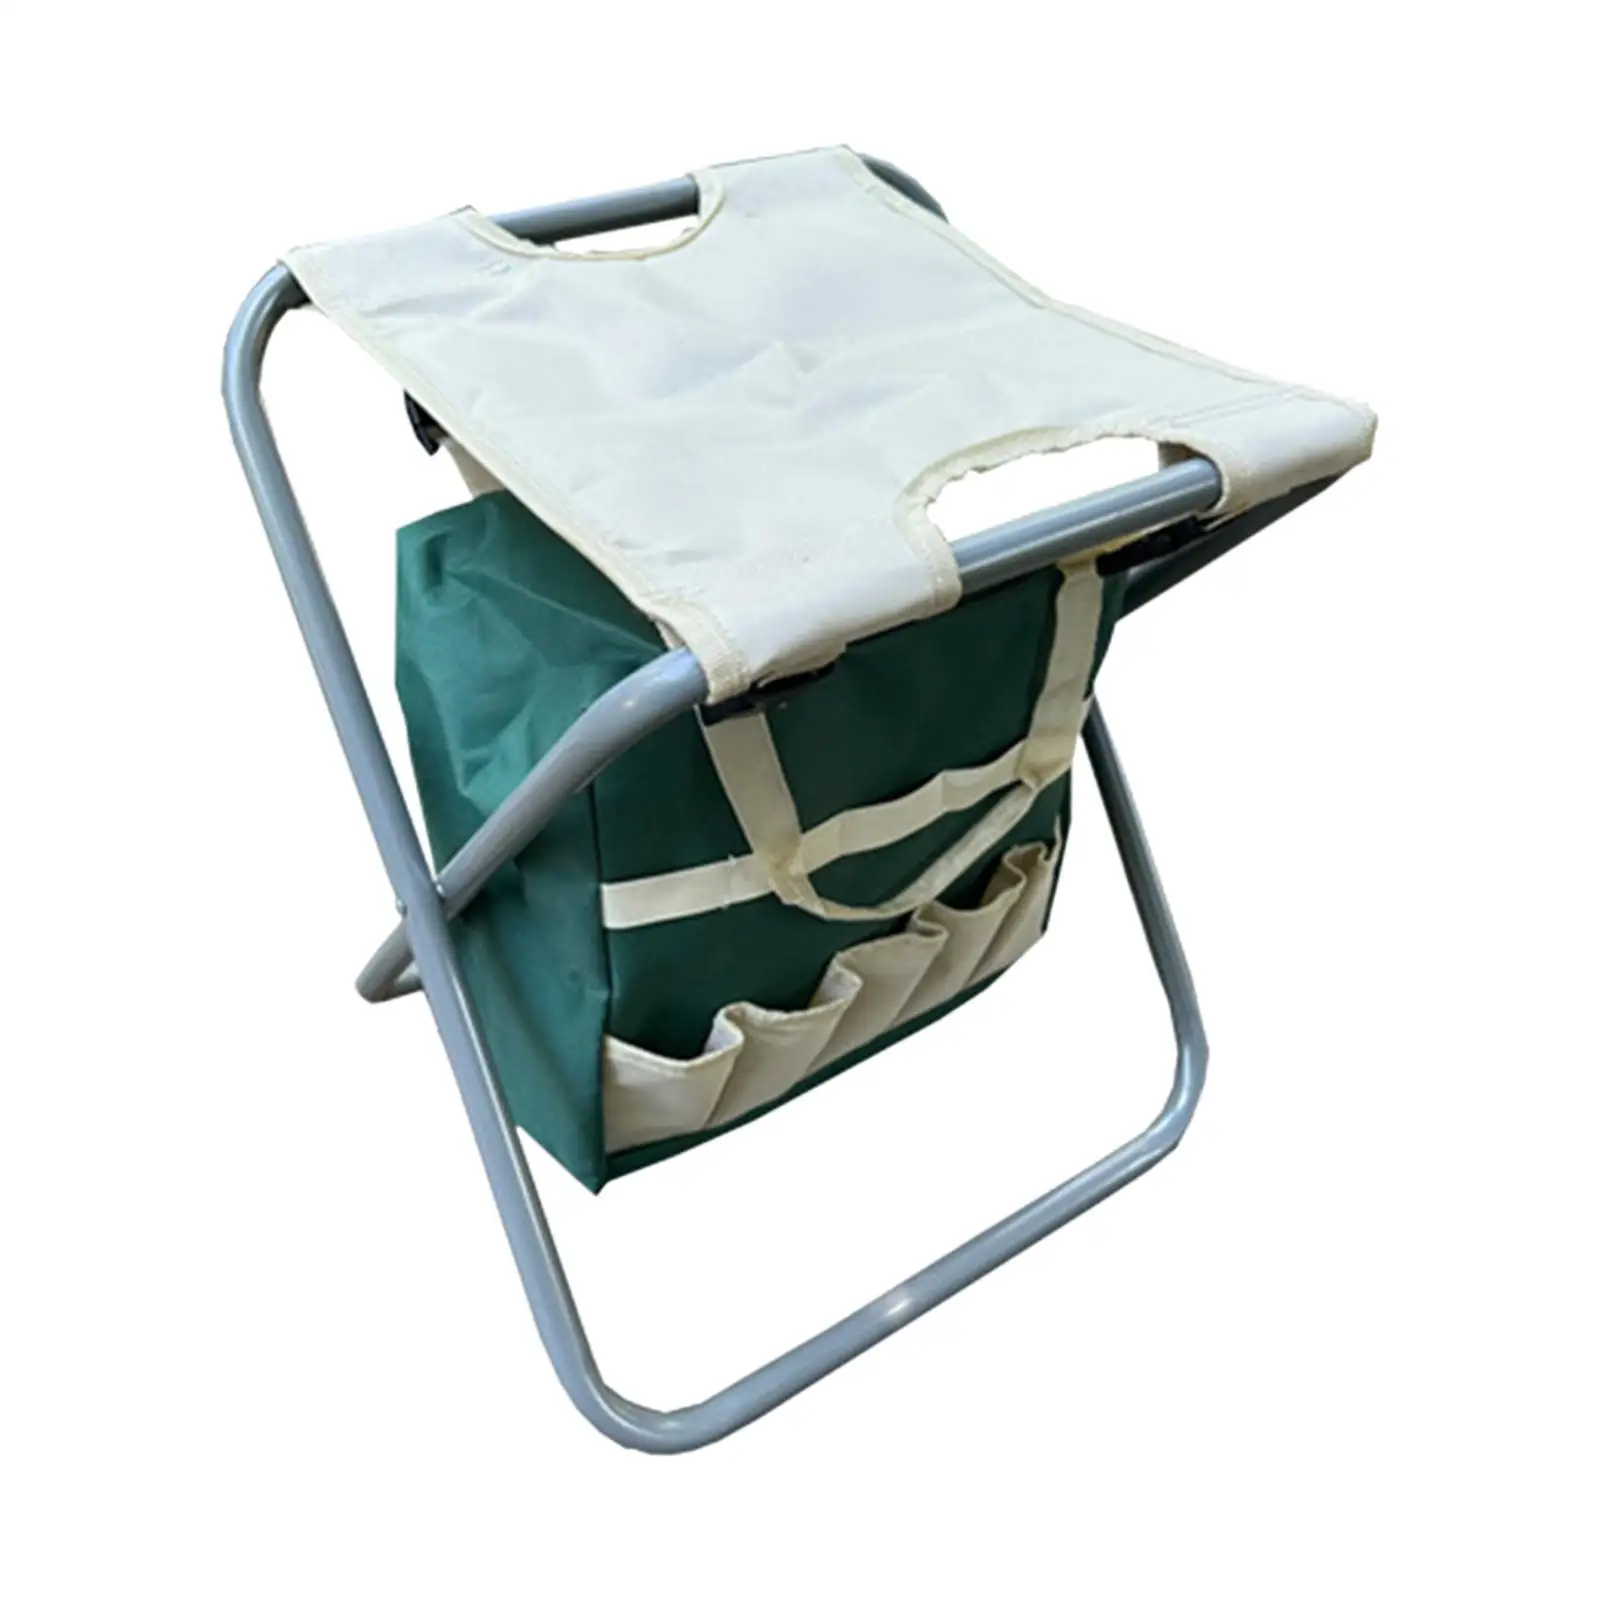 Garden Folding Stool with Tool Tote Folding Camping Stool for Lawn Courtyard